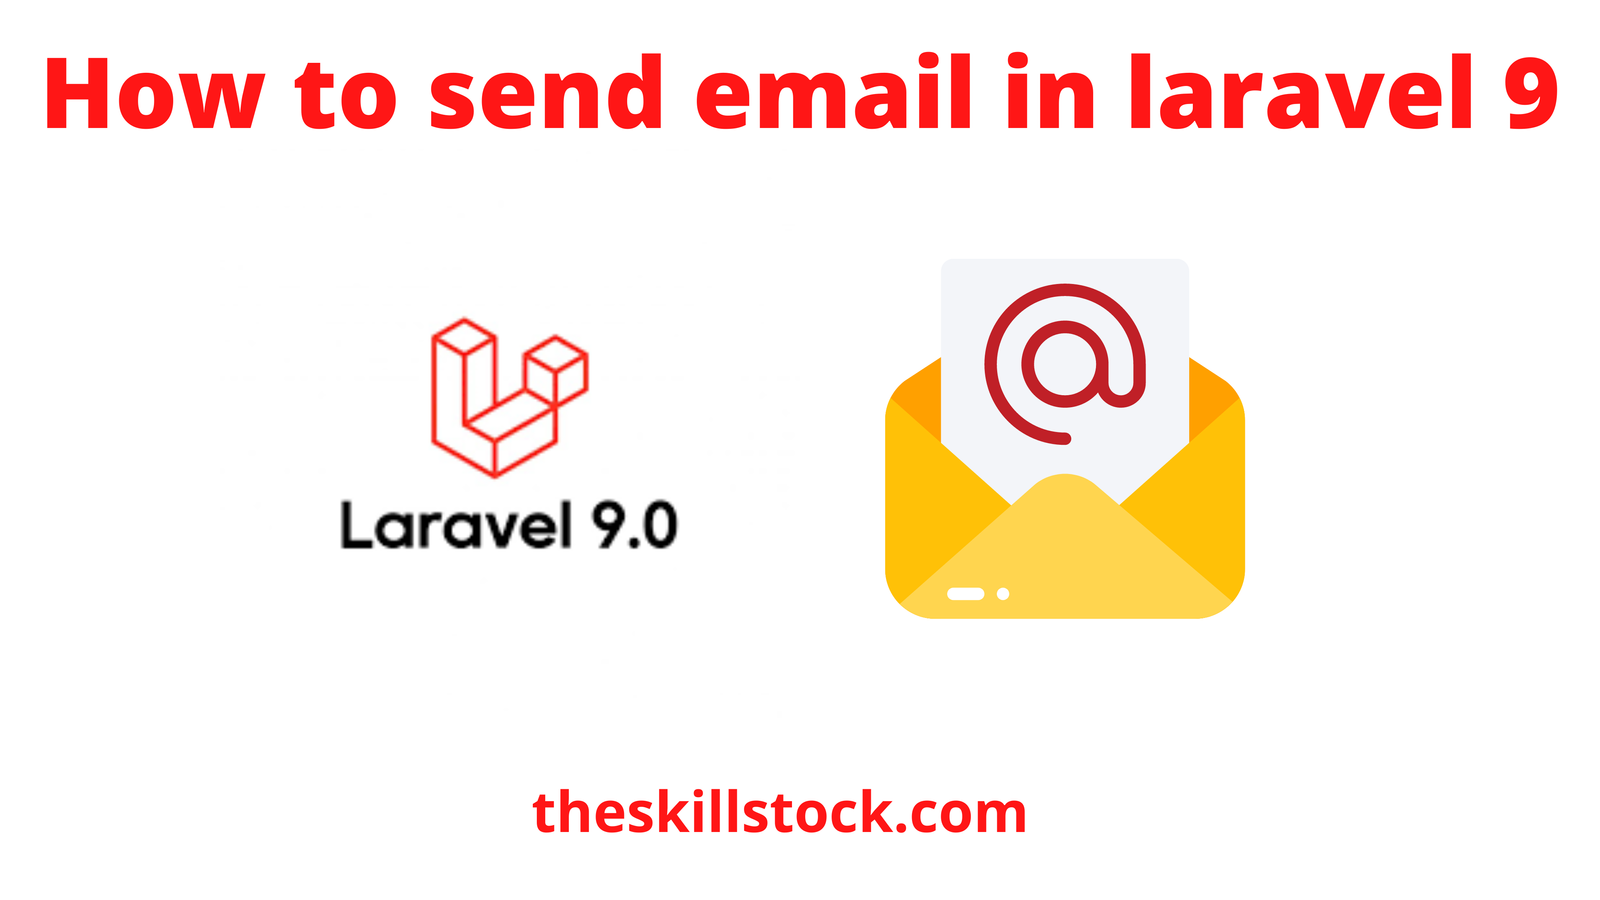 How to Send Email in Laravel 9